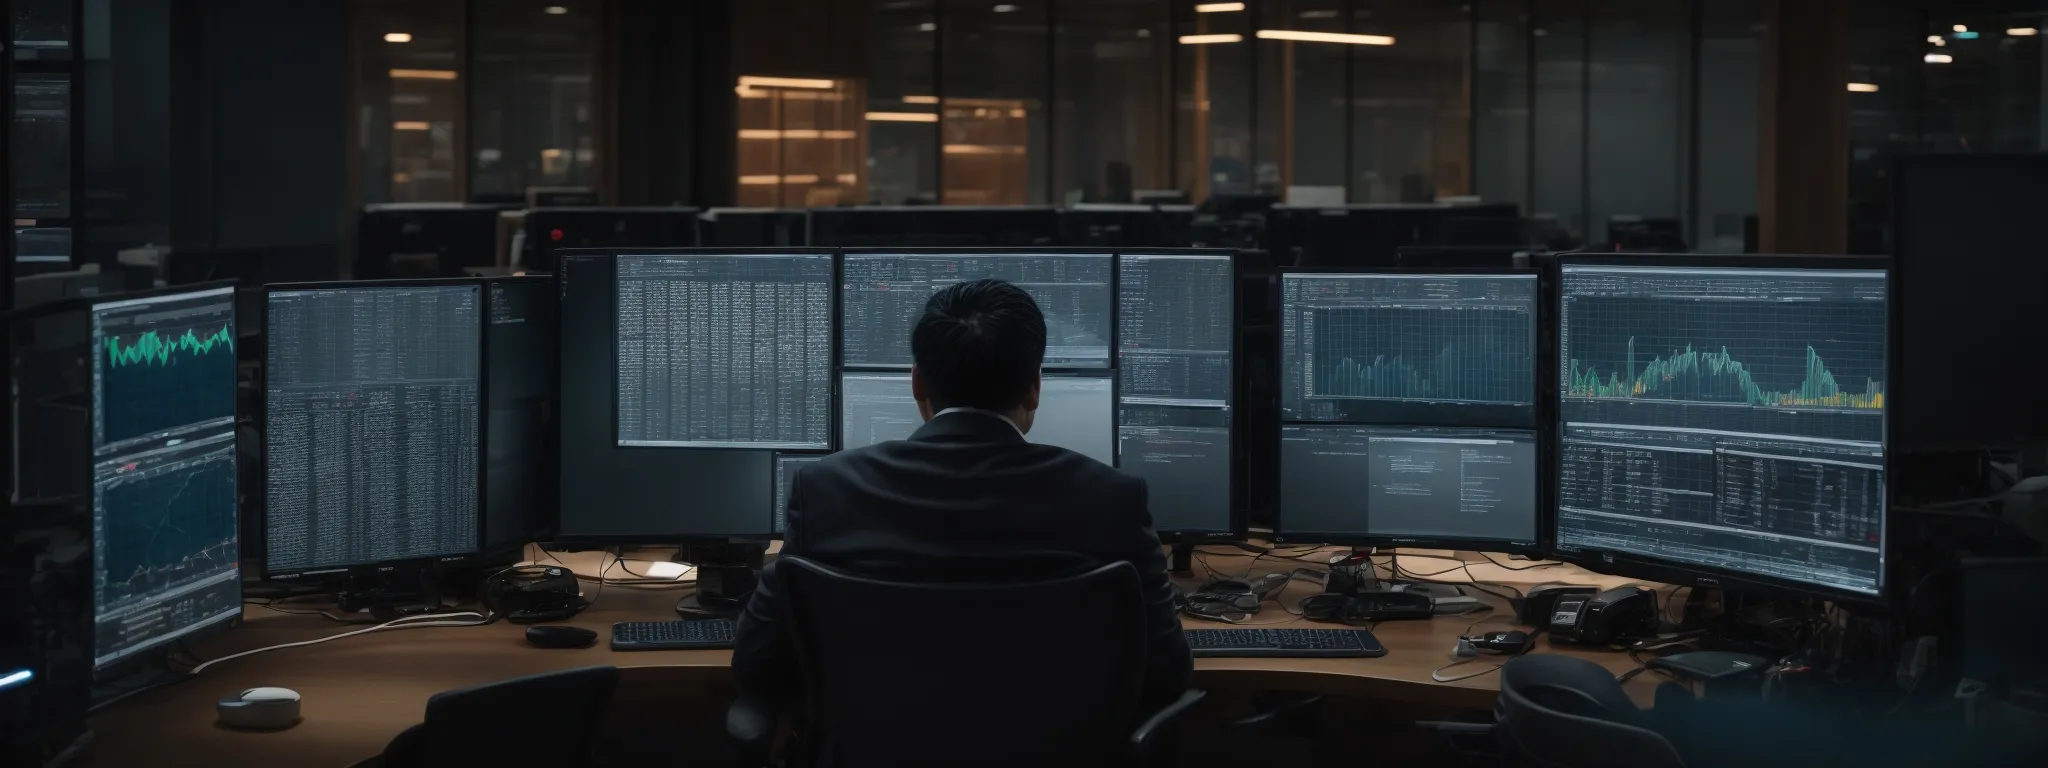 a person sitting at a secured workstation with multiple monitors displaying website analytics and a cybersecurity software interface.